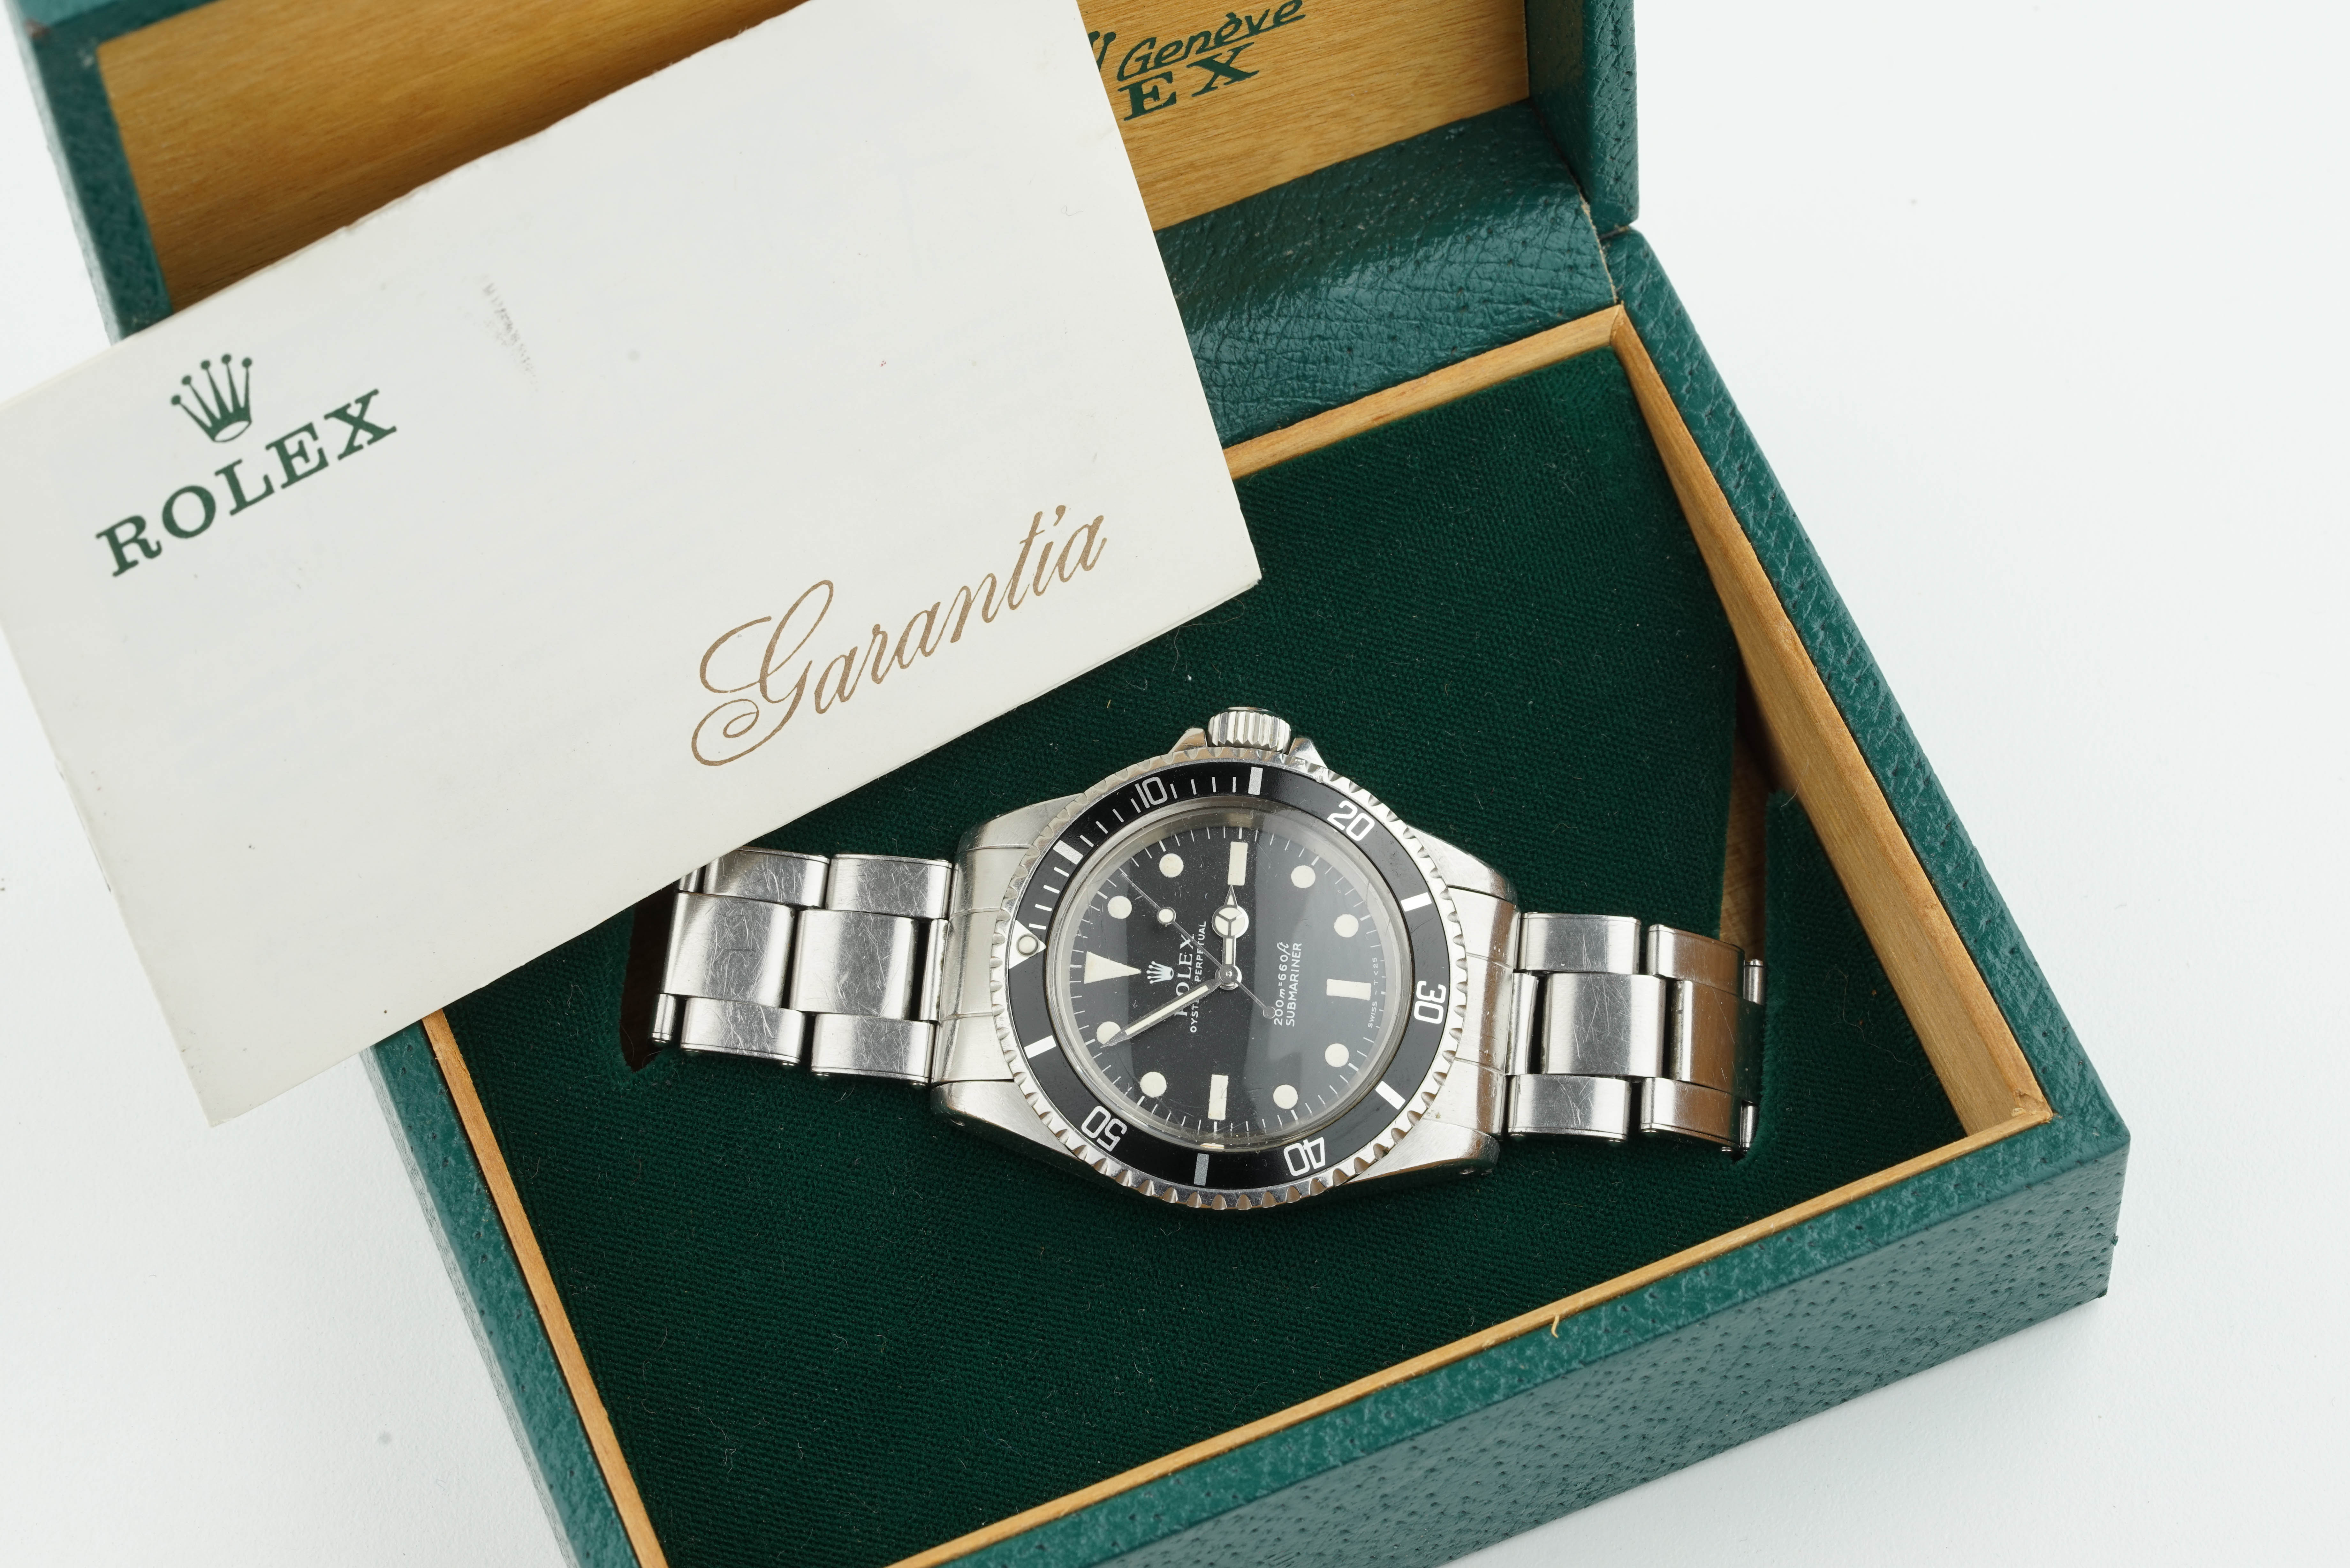 ROLEX OYSTER PERPETUAL SUBMARINER METERS FIRST DIAL 7206 RIVETED BRACELET W/ BOX & PAPERS REF.